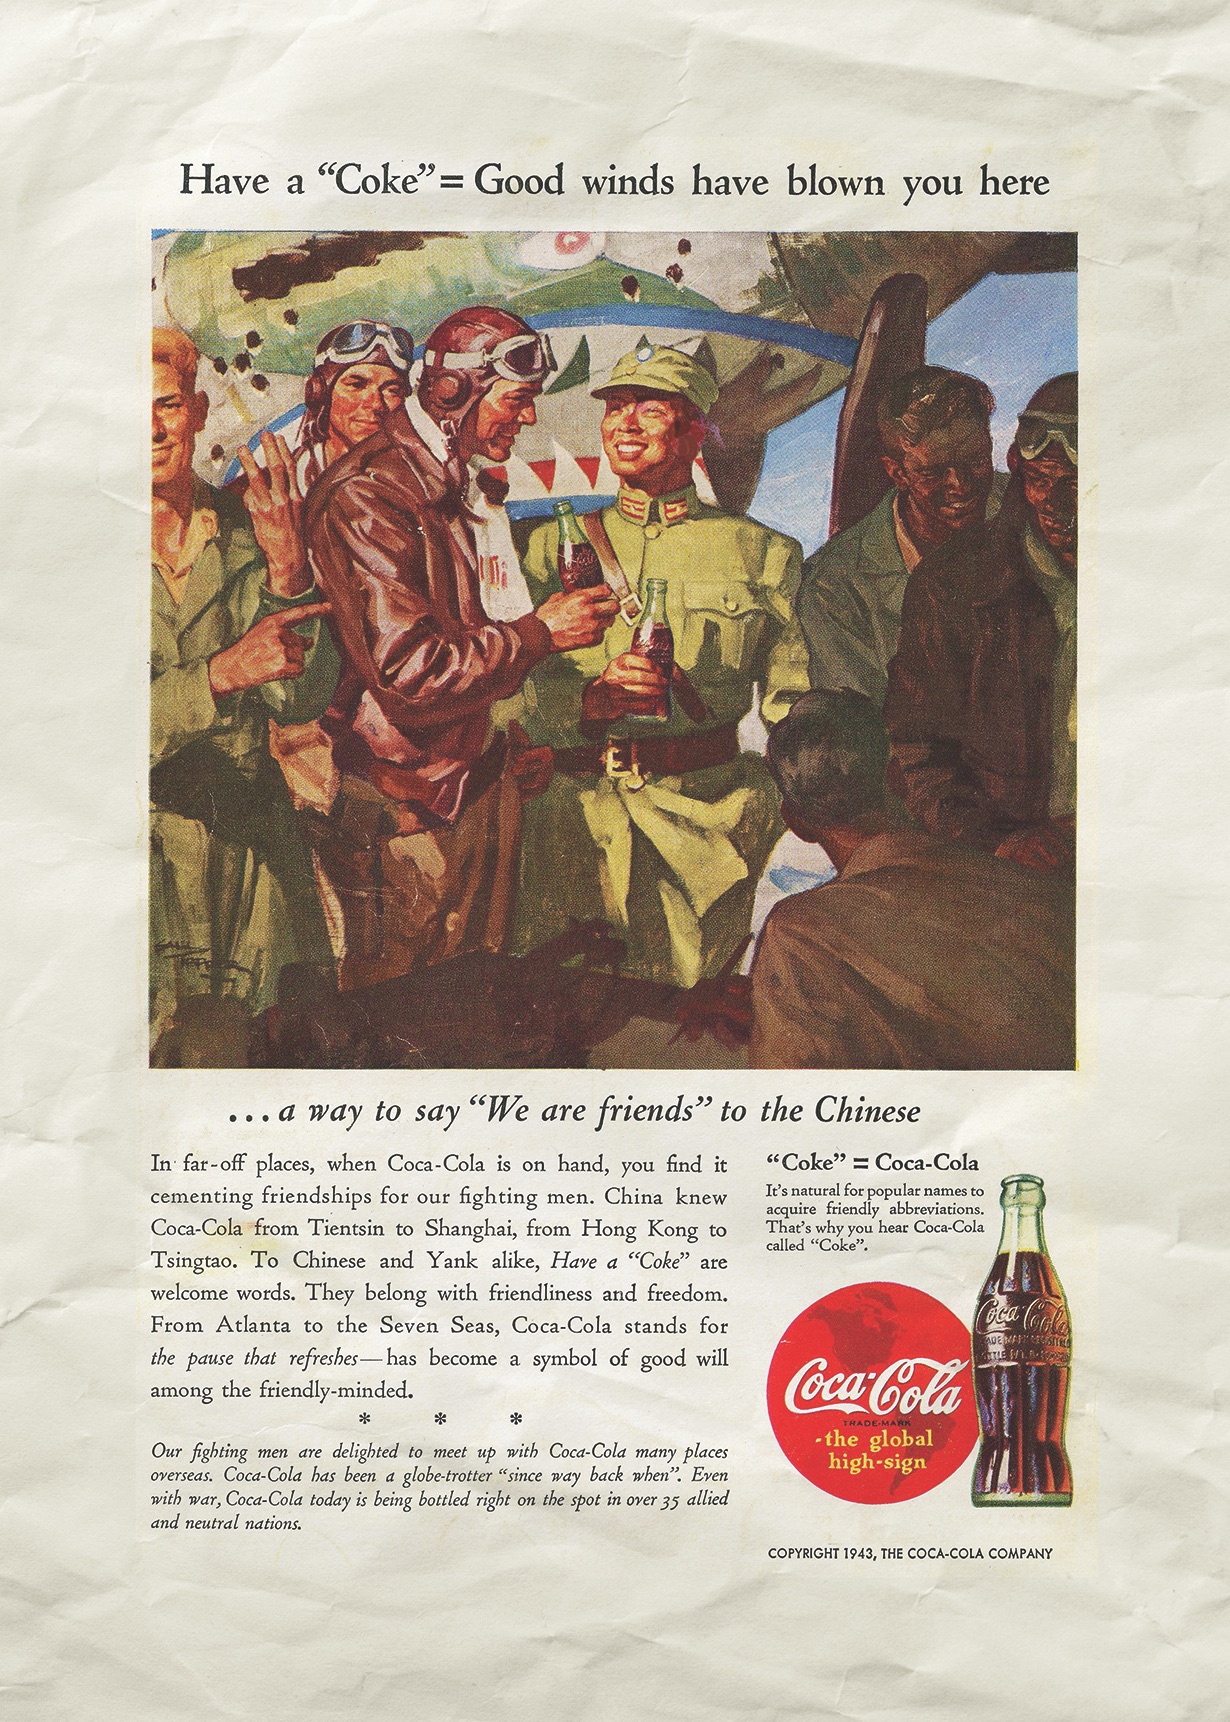  A 1943 magazine ad touts Coke as “the global high-sign” for American fighting men overseas.(Advertising Archives/Bridgeman Images) 